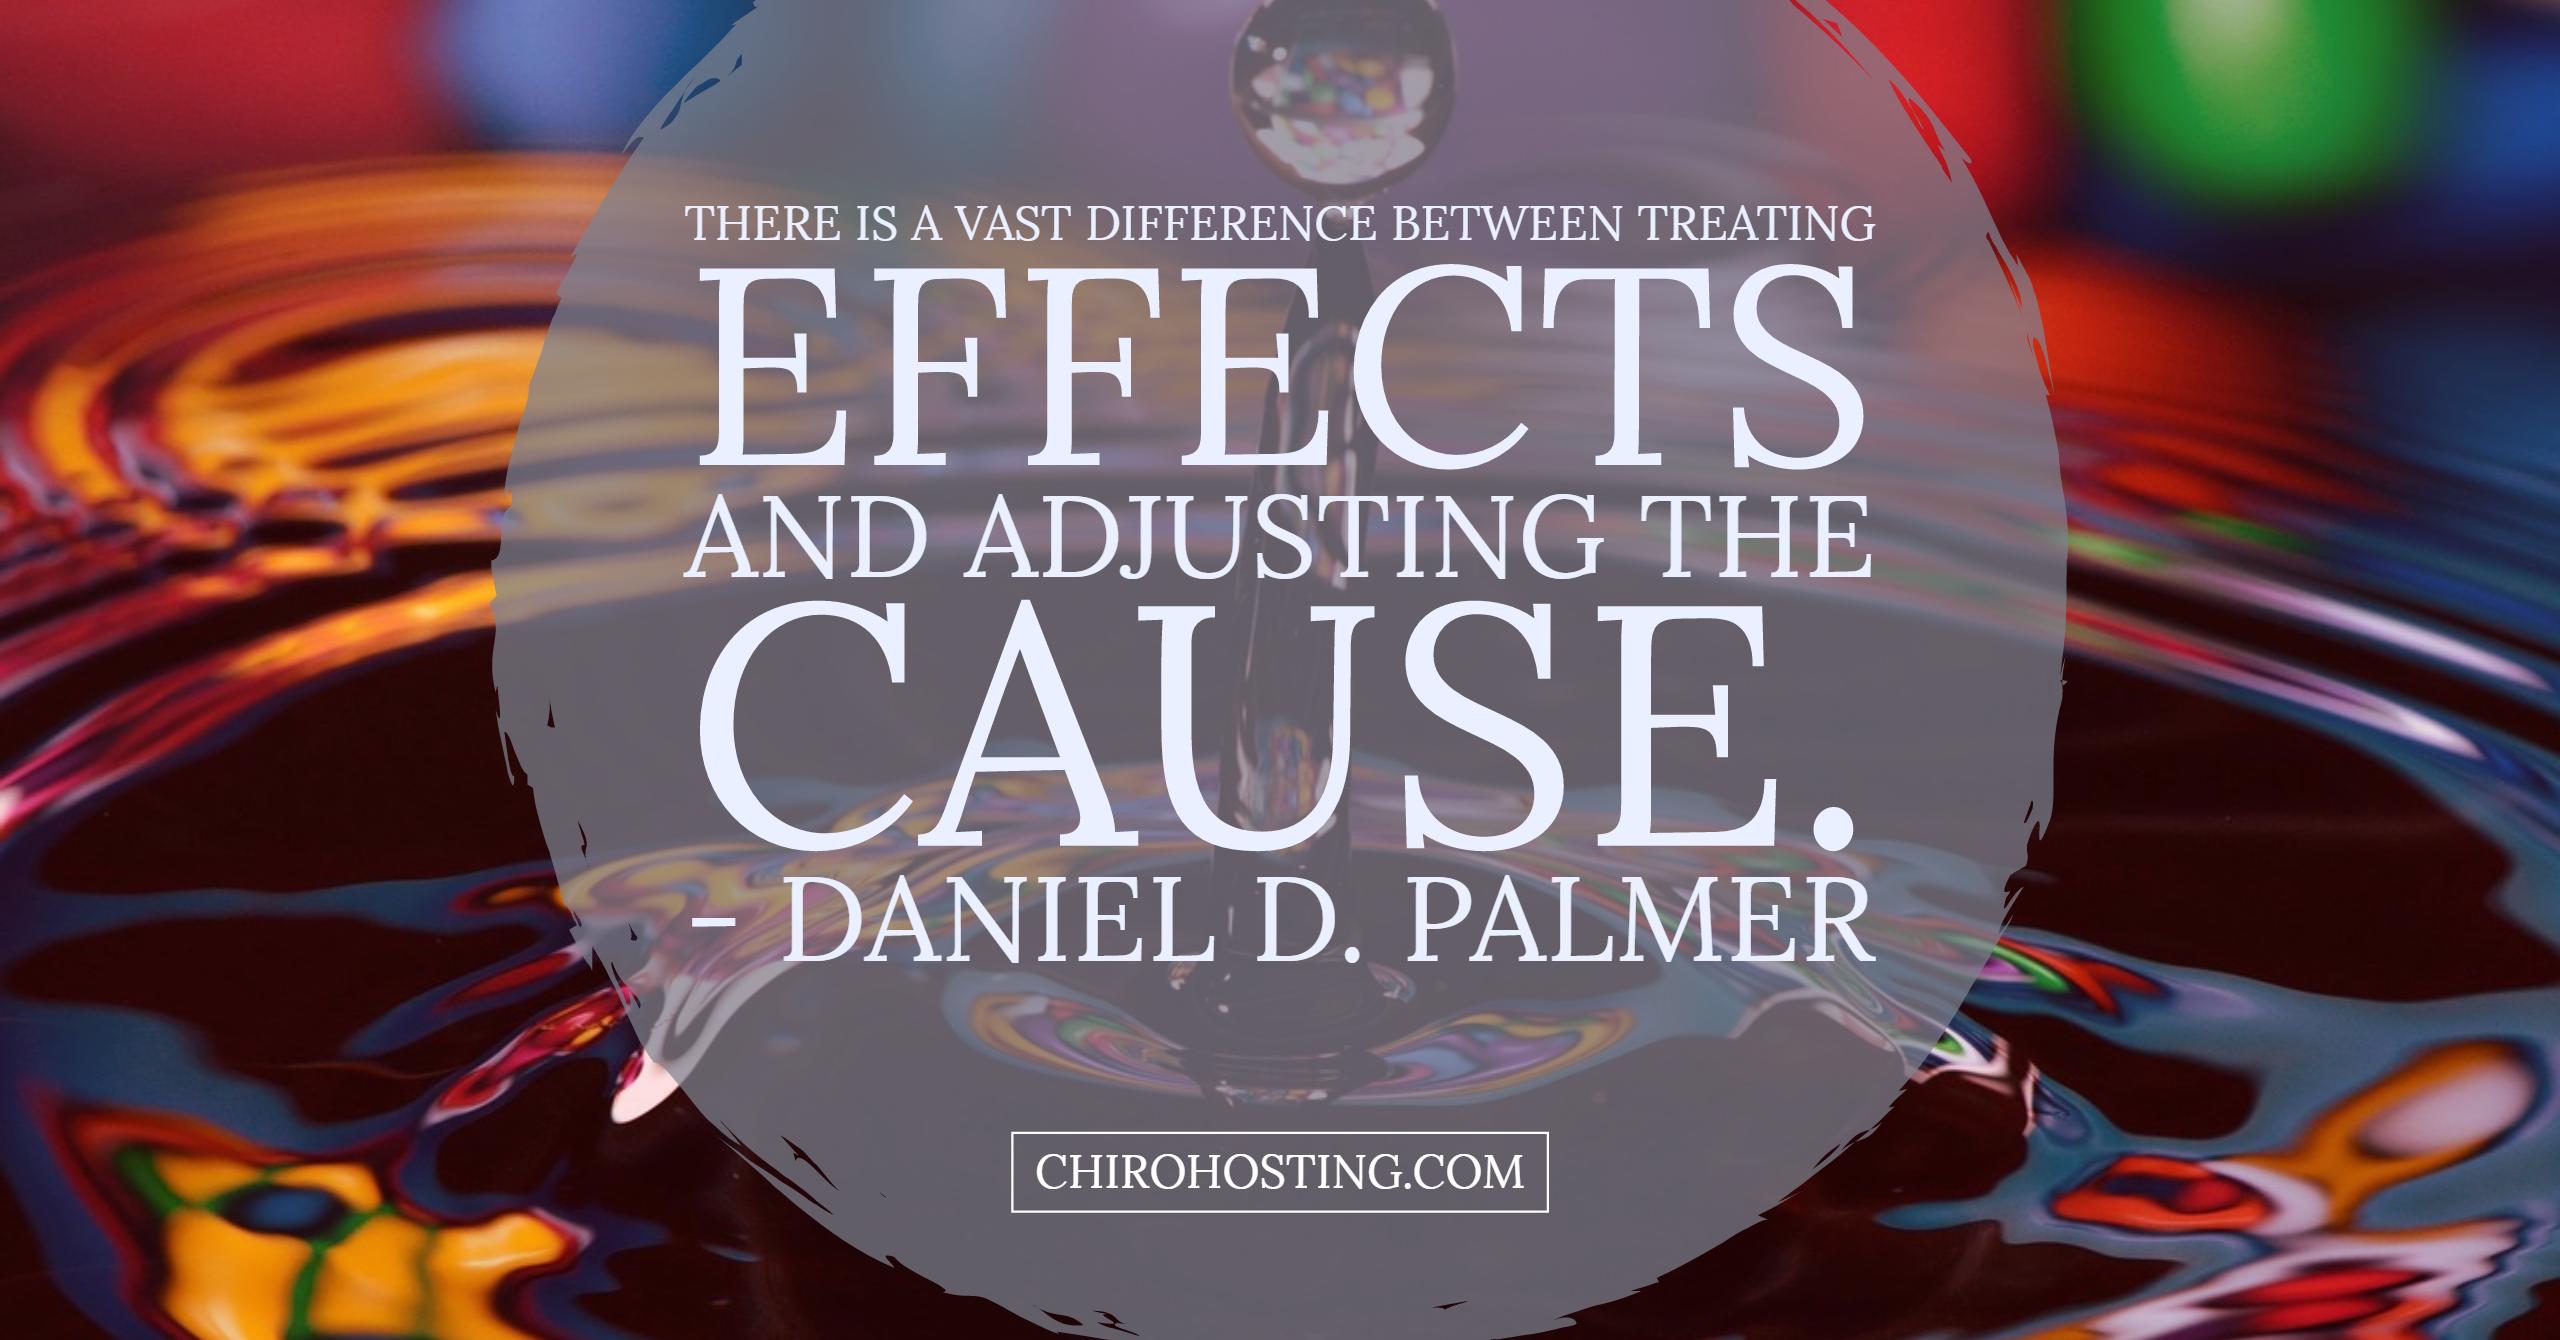 There Is a Vast Difference between Treating Effects and Adjusting the Cause